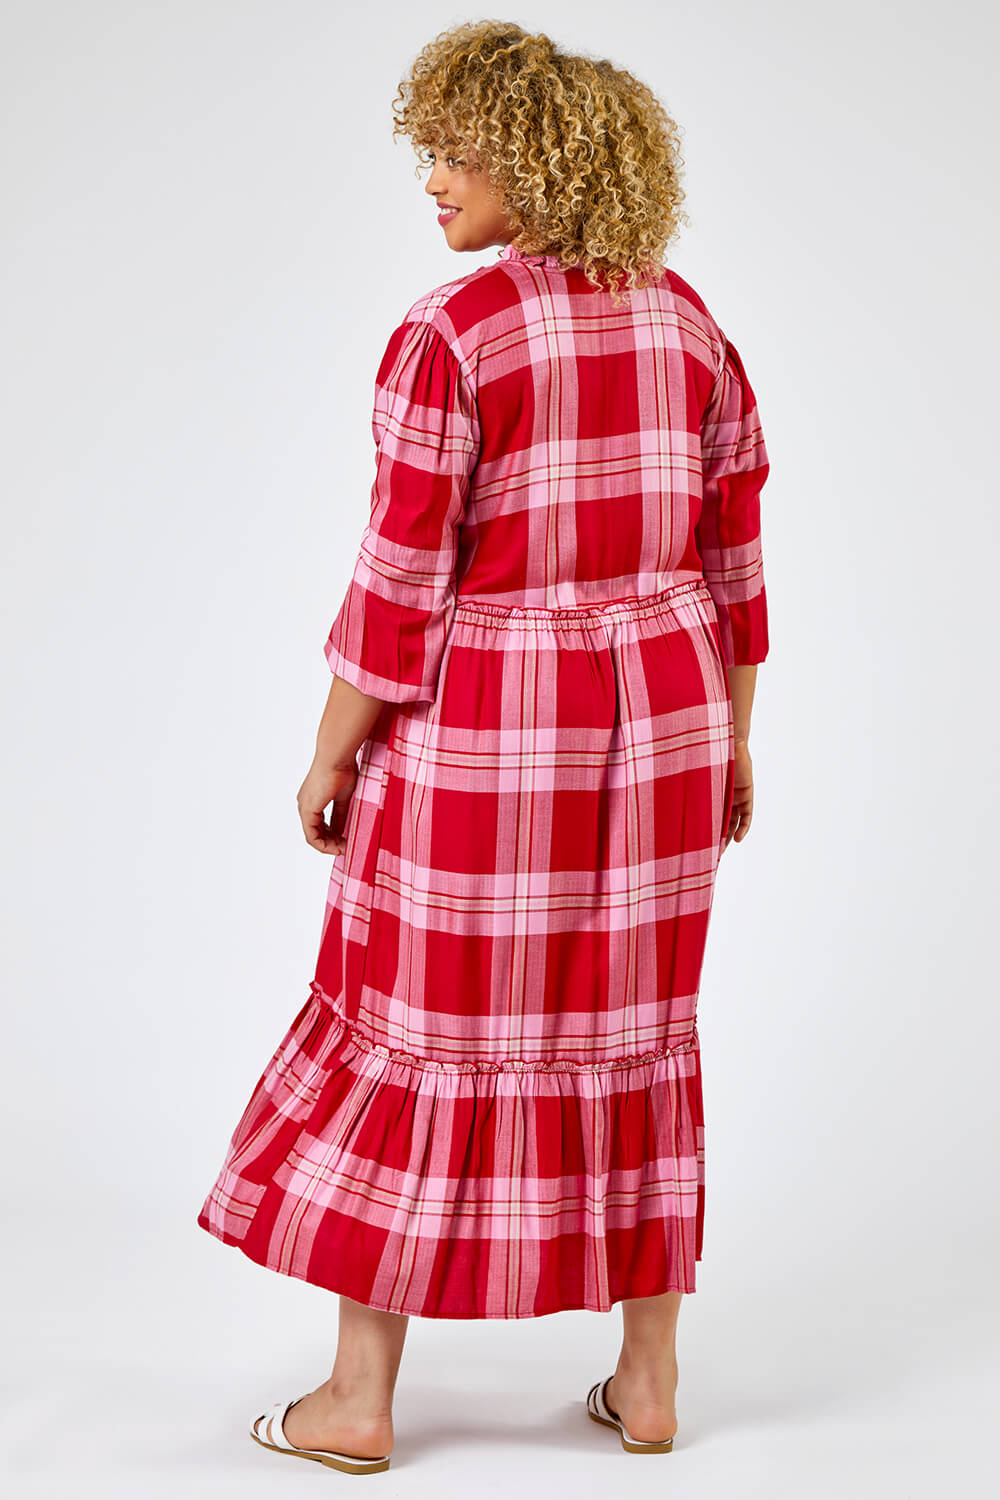 PINK Curve Check Print Tiered Dress, Image 2 of 5